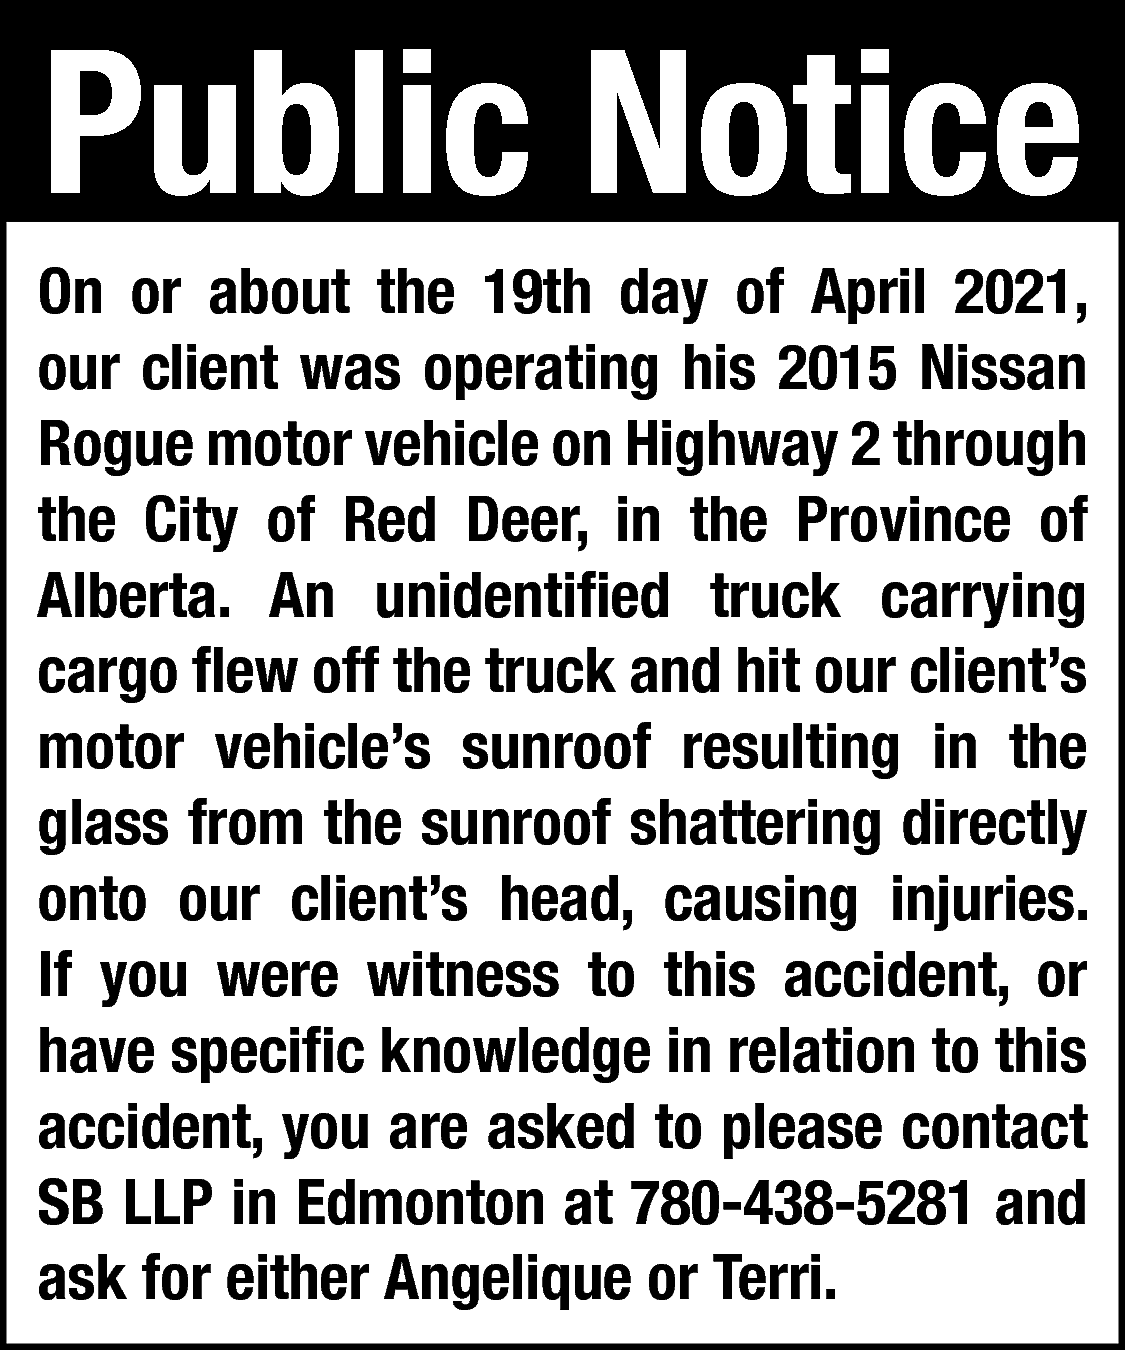 Public Notice <br> <br>On or  Public Notice    On or about the 19th day of April 2021,  our client was operating his 2015 Nissan  Rogue motor vehicle on Highway 2 through  the City of Red Deer, in the Province of  Alberta. An unidentified truck carrying  cargo flew off the truck and hit our client’s  motor vehicle’s sunroof resulting in the  glass from the sunroof shattering directly  onto our client’s head, causing injuries.  If you were witness to this accident, or  have specific knowledge in relation to this  accident, you are asked to please contact  SB LLP in Edmonton at 780-438-5281 and  ask for either Angelique or Terri.    